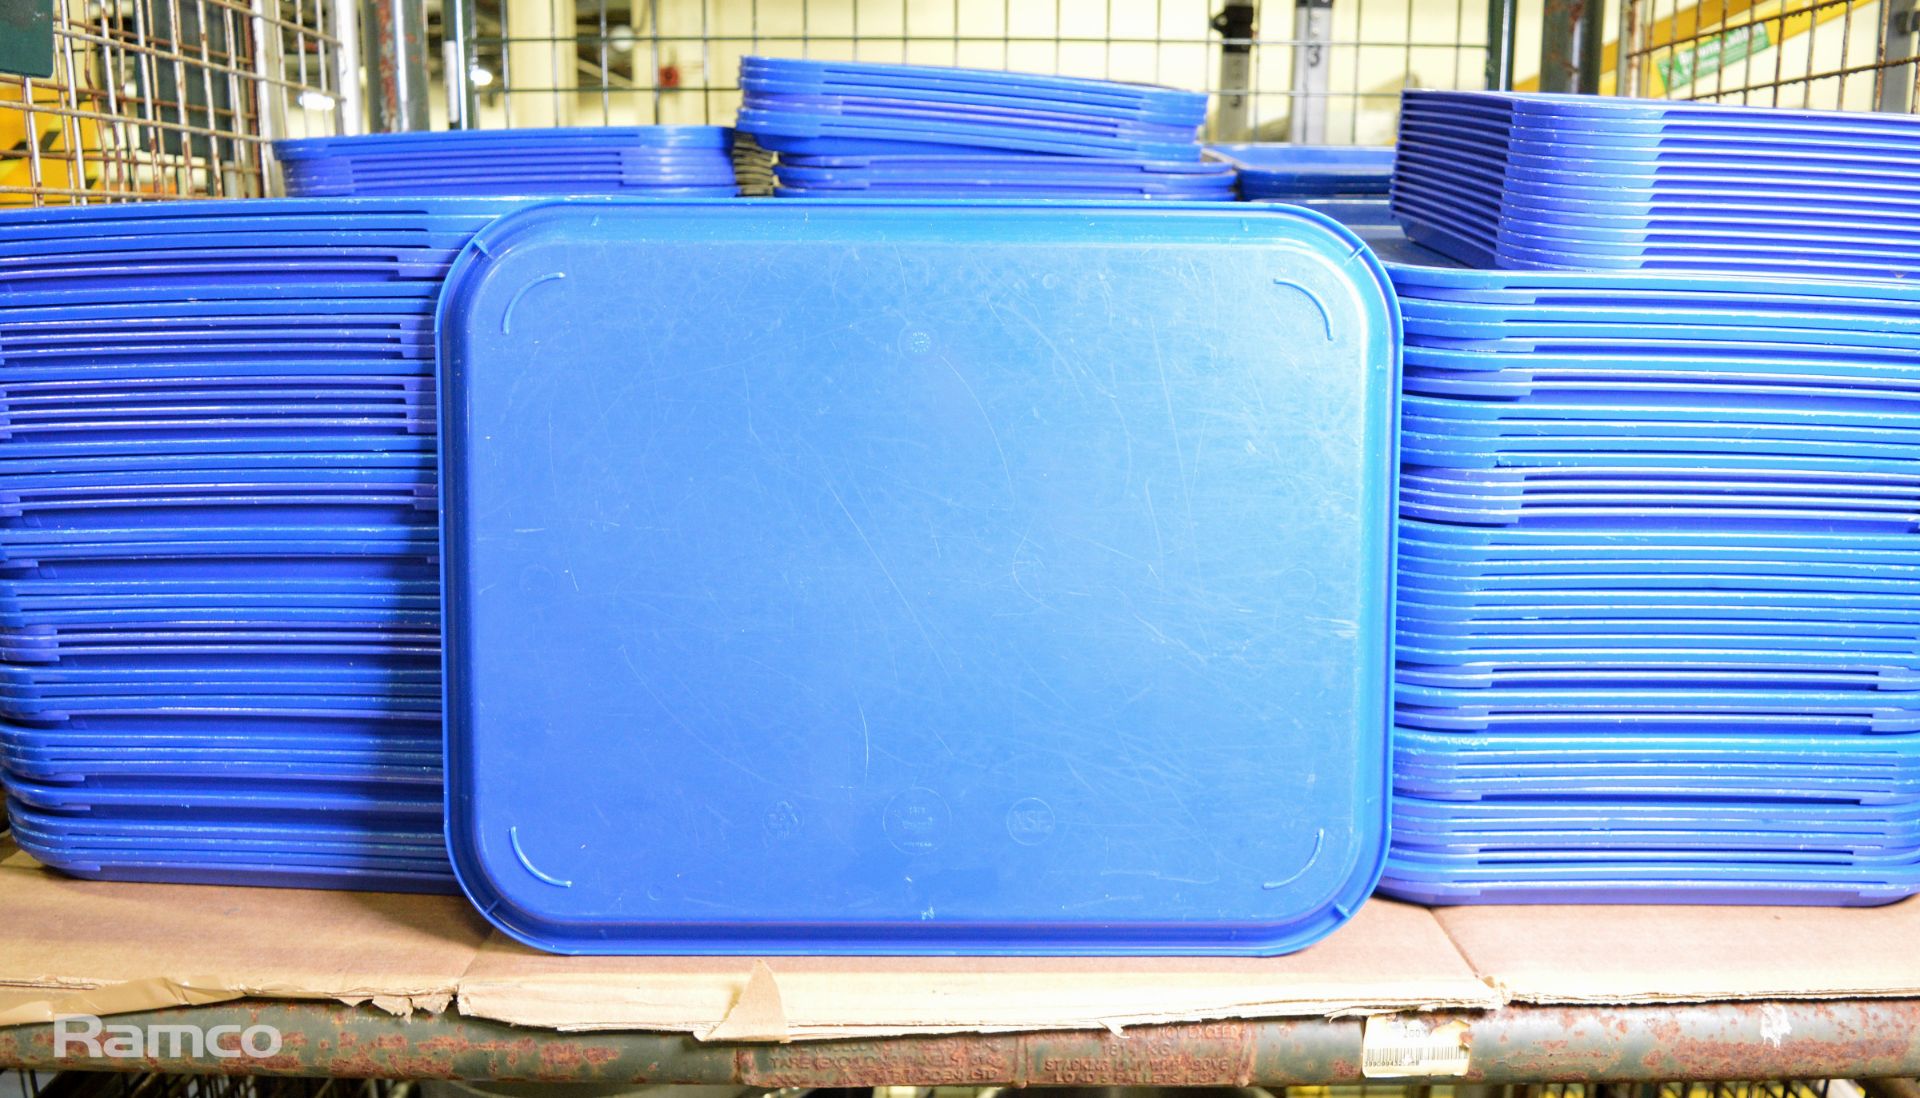 295x Canteen plastic trays - Image 4 of 4